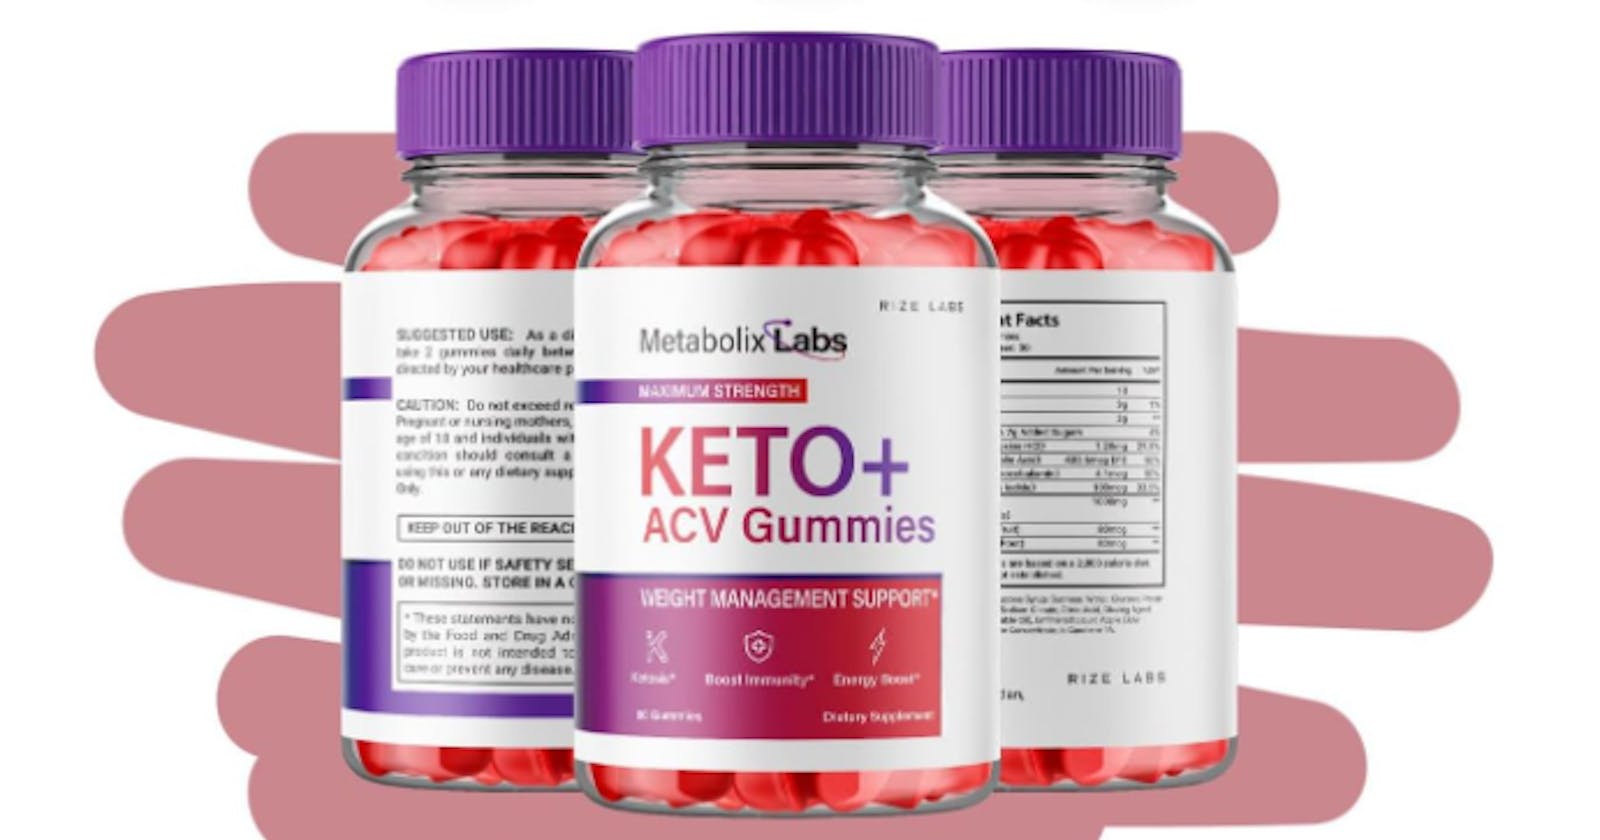 Metabolix Labs Keto ACV Gummies Review: Are These Fat Burning Pills Legit?